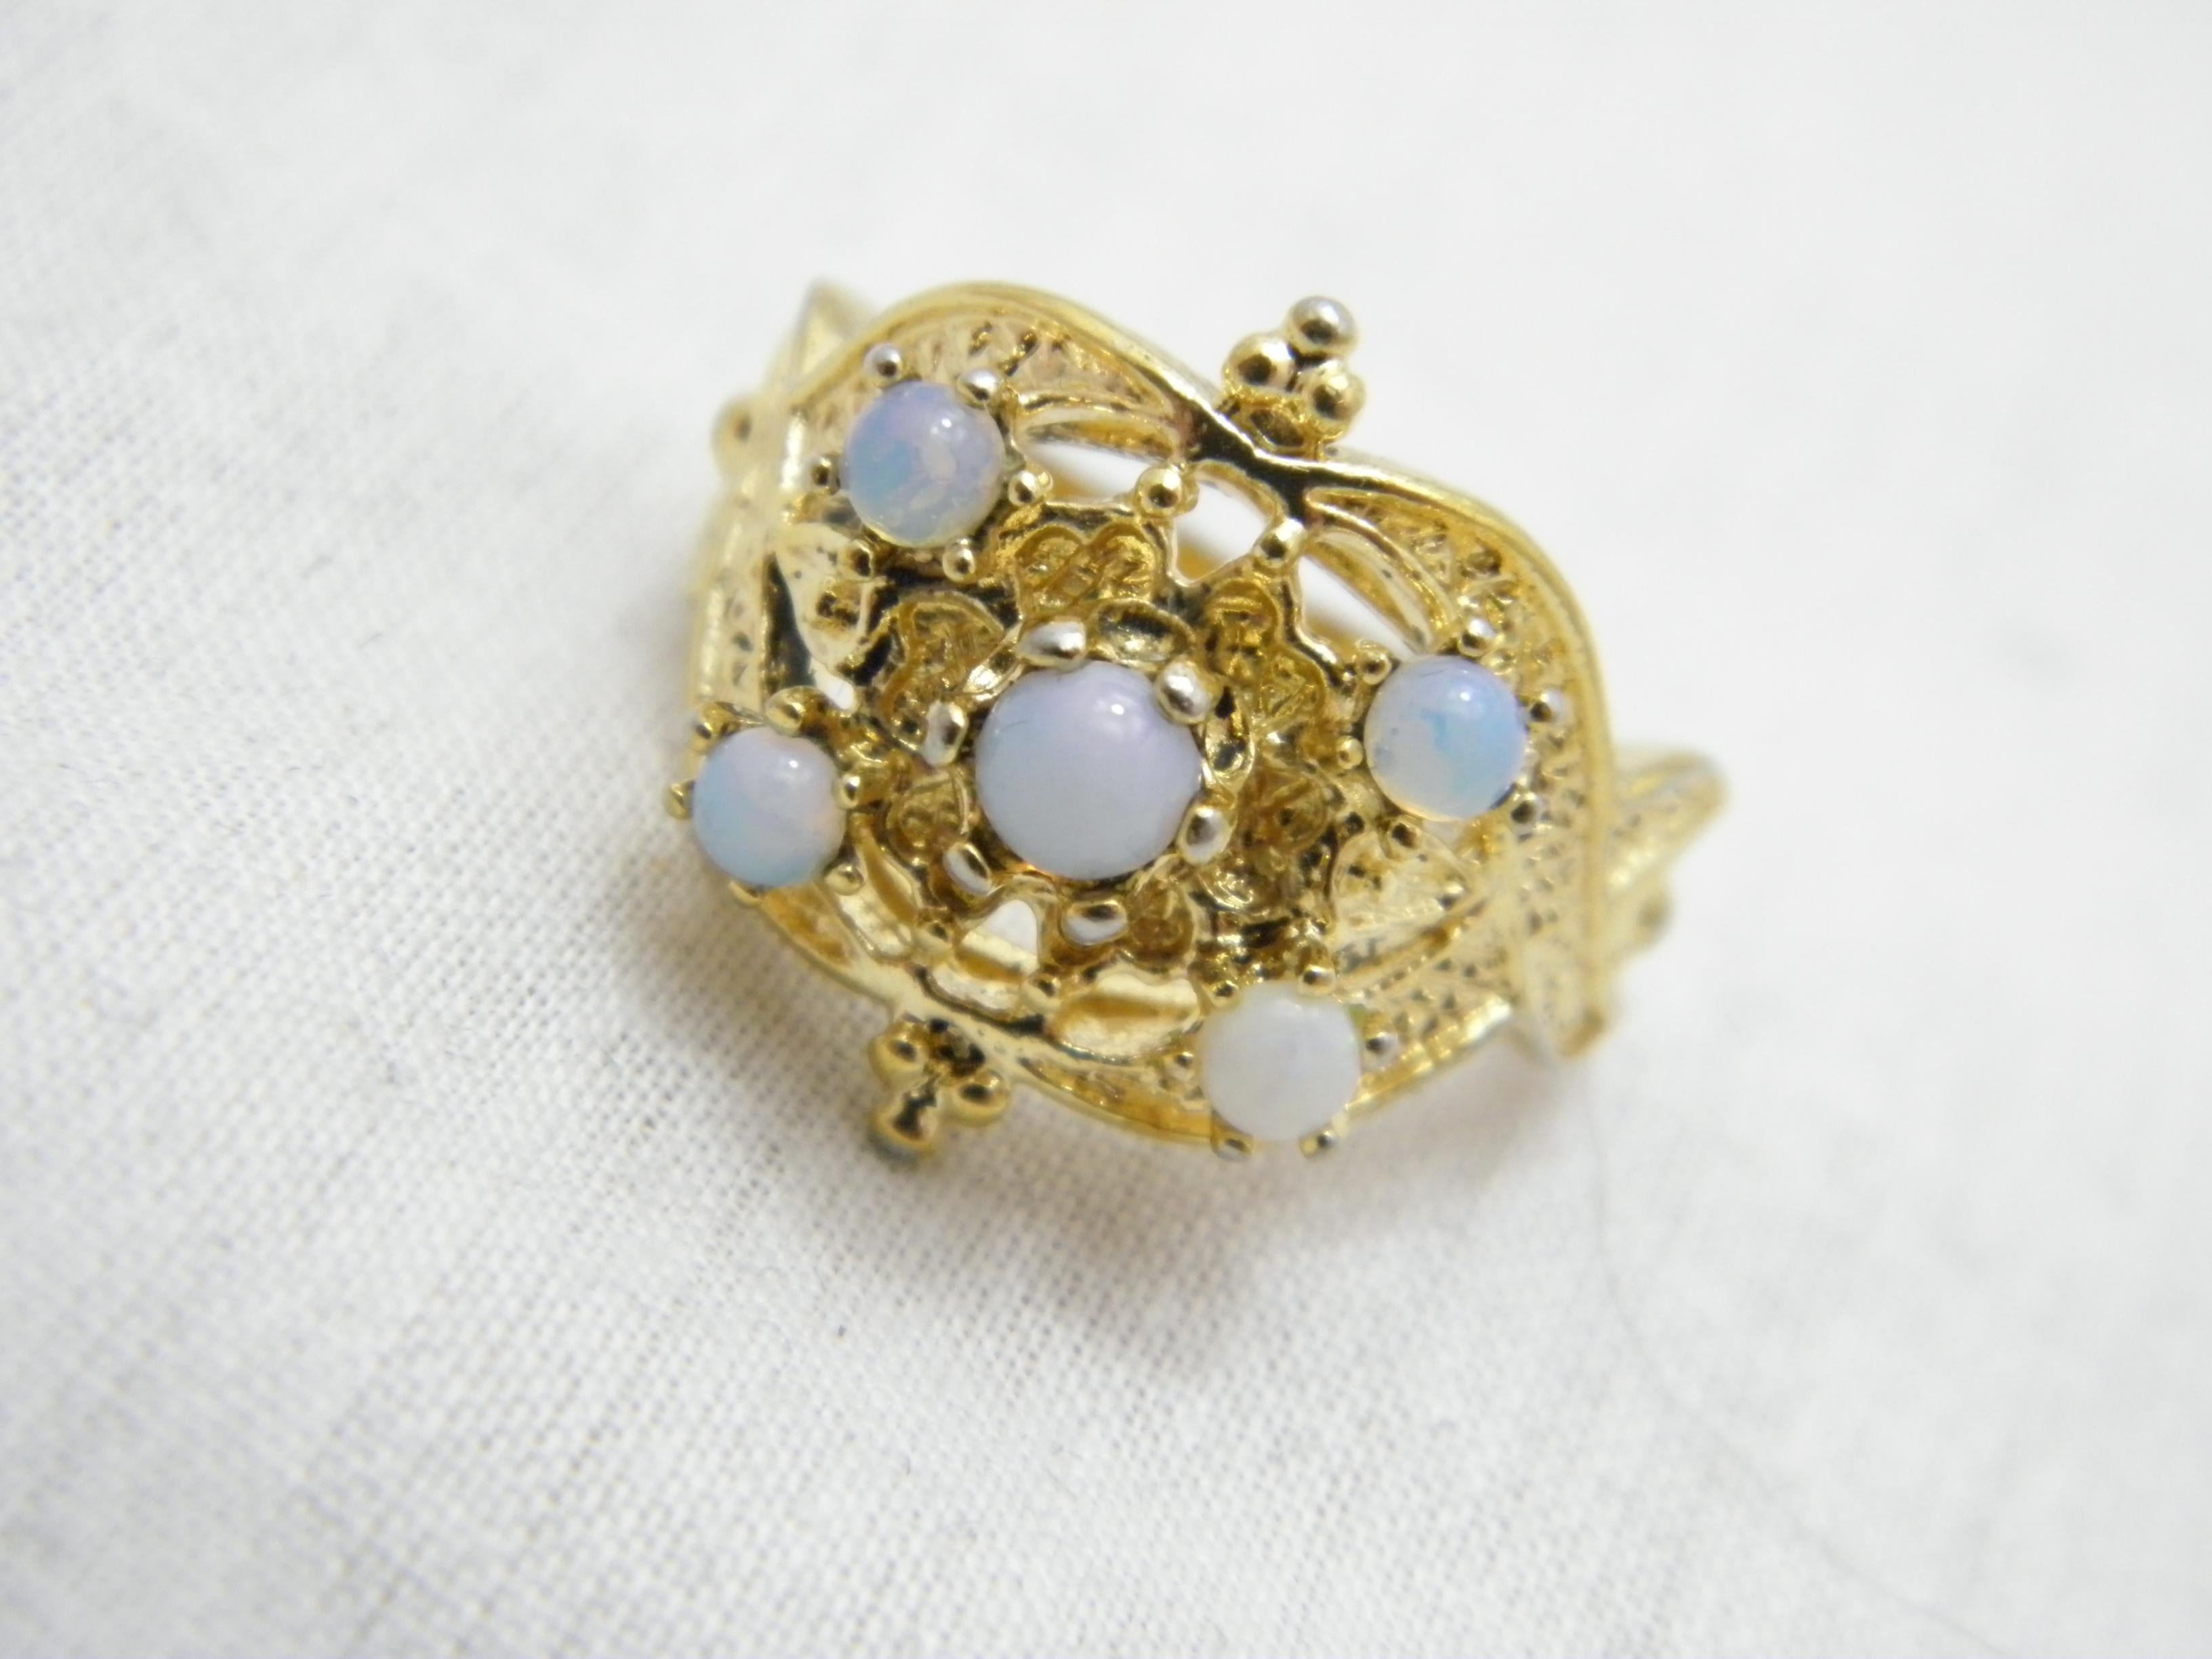 A very special item for you to consider:

14CT GOLD VINTAGE WHITE OPAL CHUNKY SIGNET STYLE RING

DETAILS
Material: Solid 14ct (585/000) gold
Style: Victorian style keeper ring set with white opals
Gemstones: Round cabochon cut Coober Pedy white